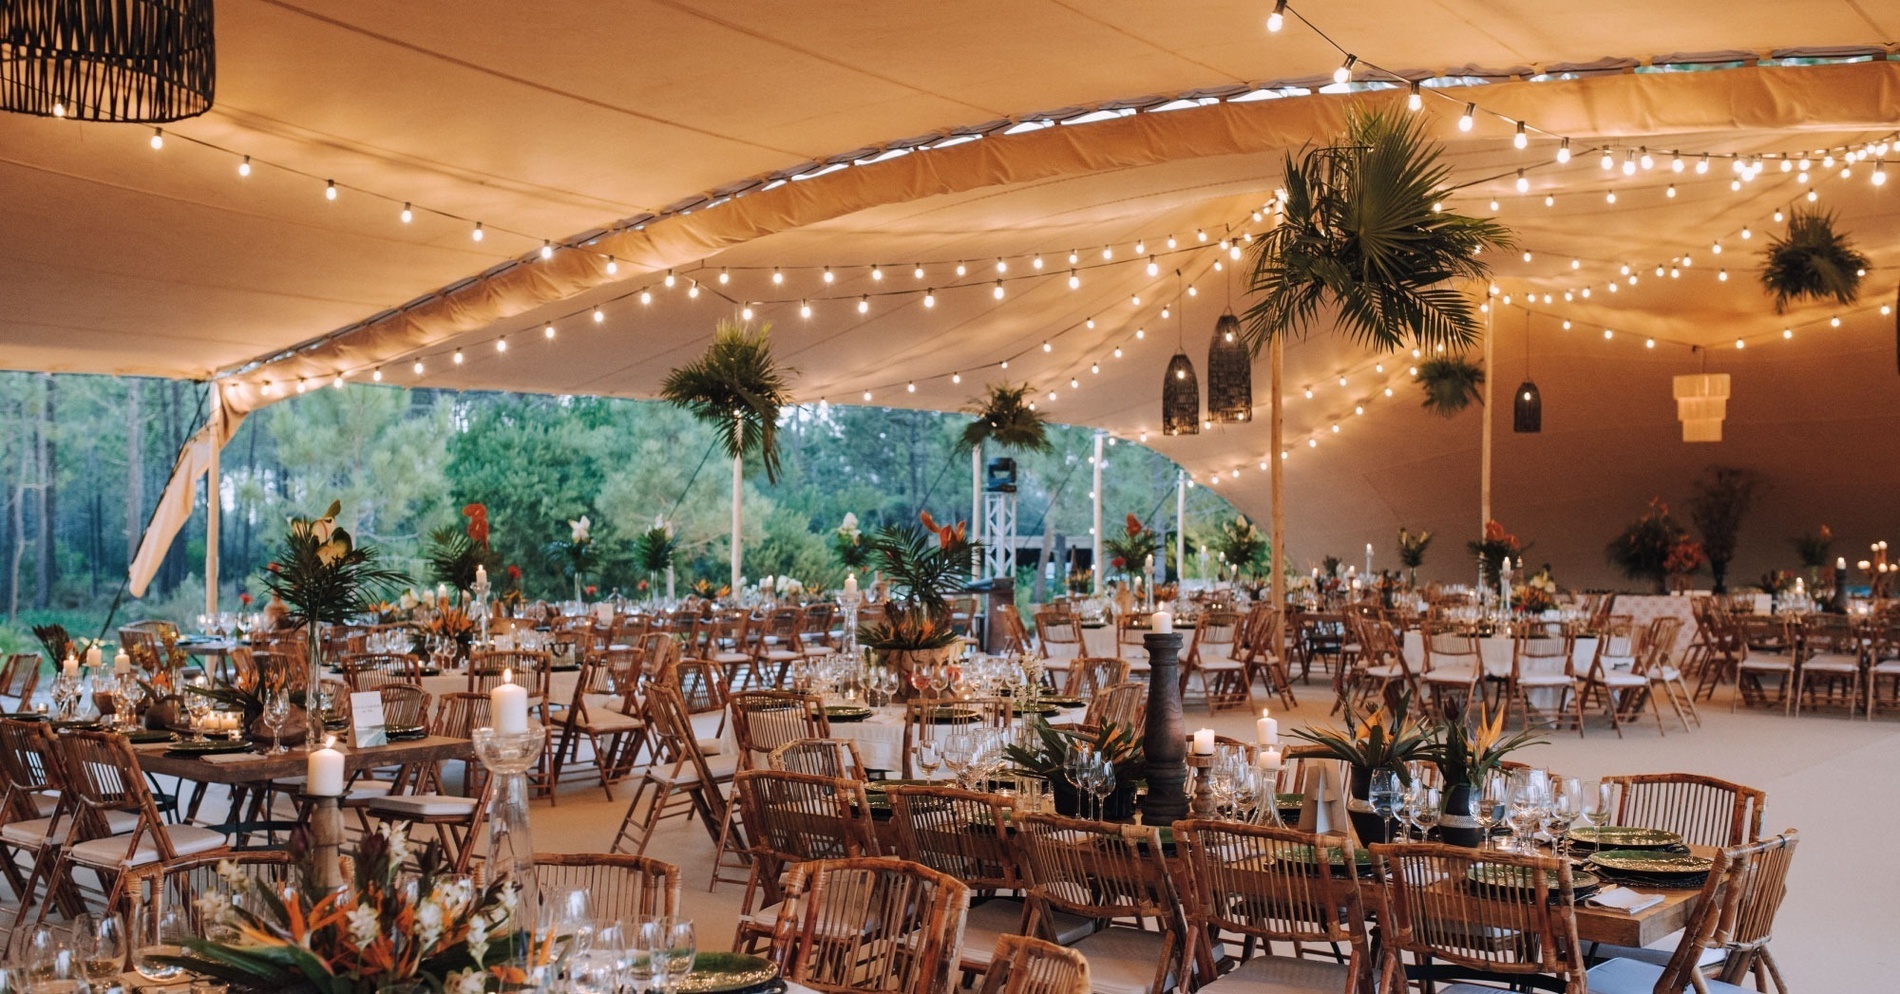 a large tent with tables and chairs set up for a wedding reception